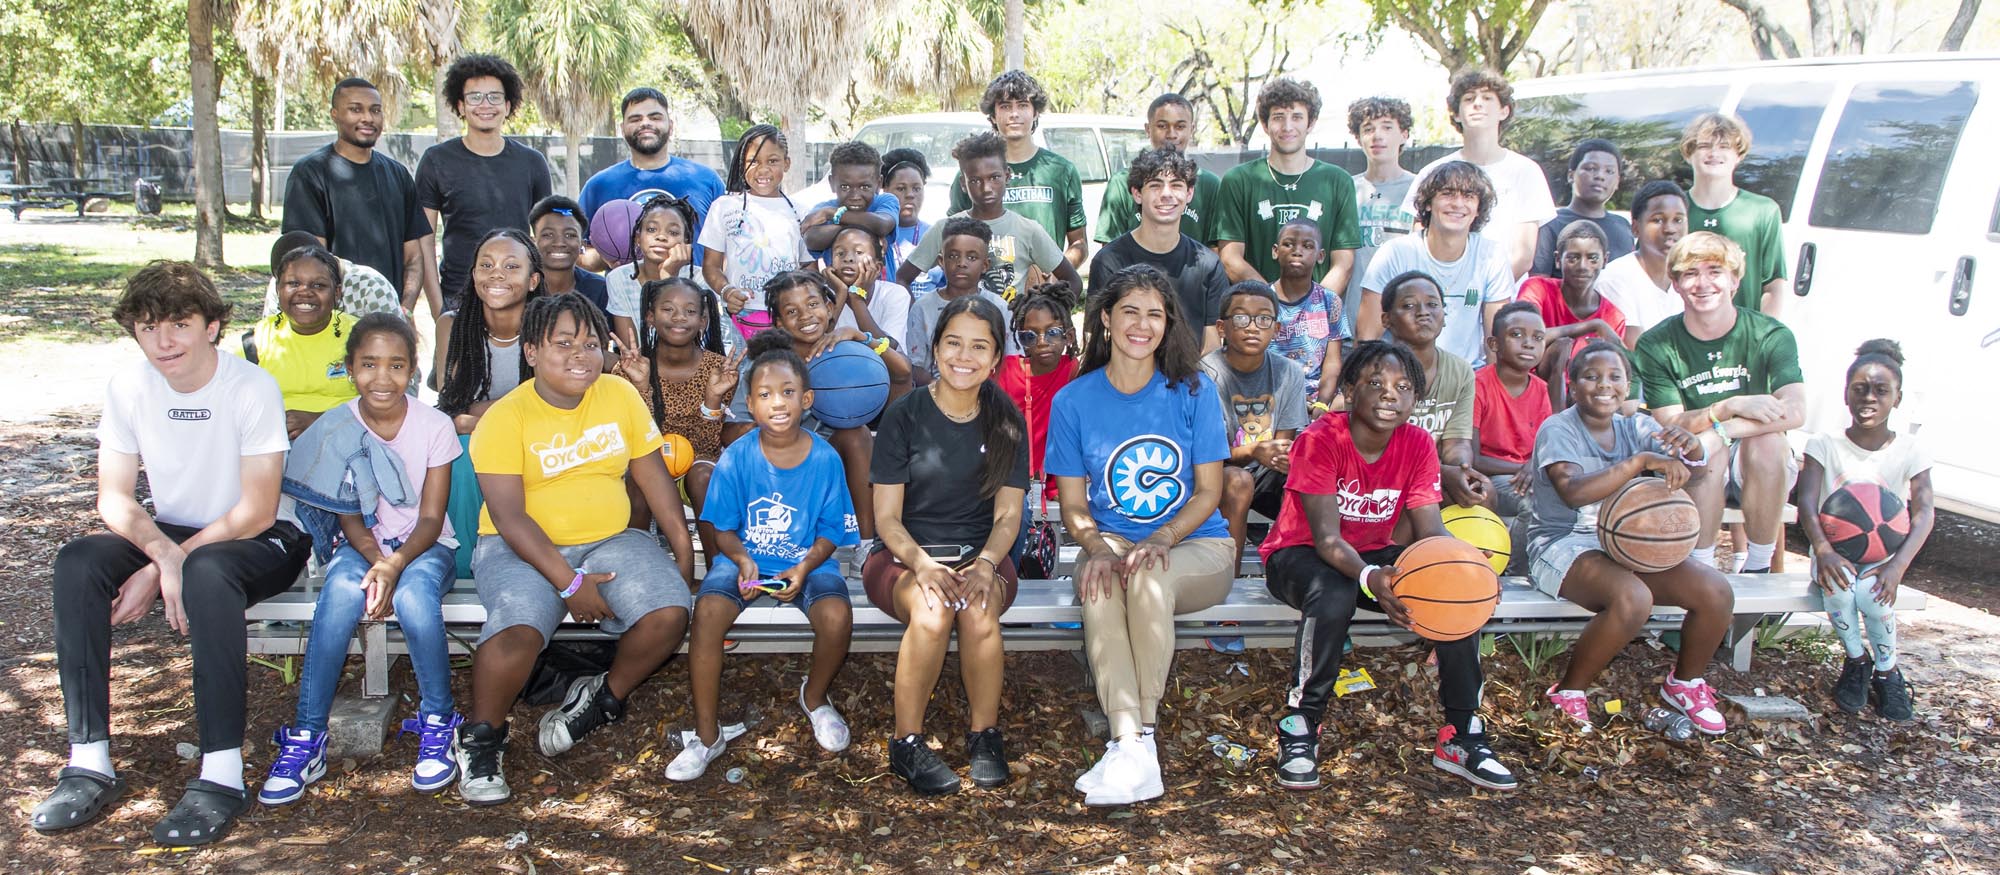 From January to May OYC Miami hosts bi-monthly Super Saturdays; days in which youth are provide with educational and enriching STEM activities.